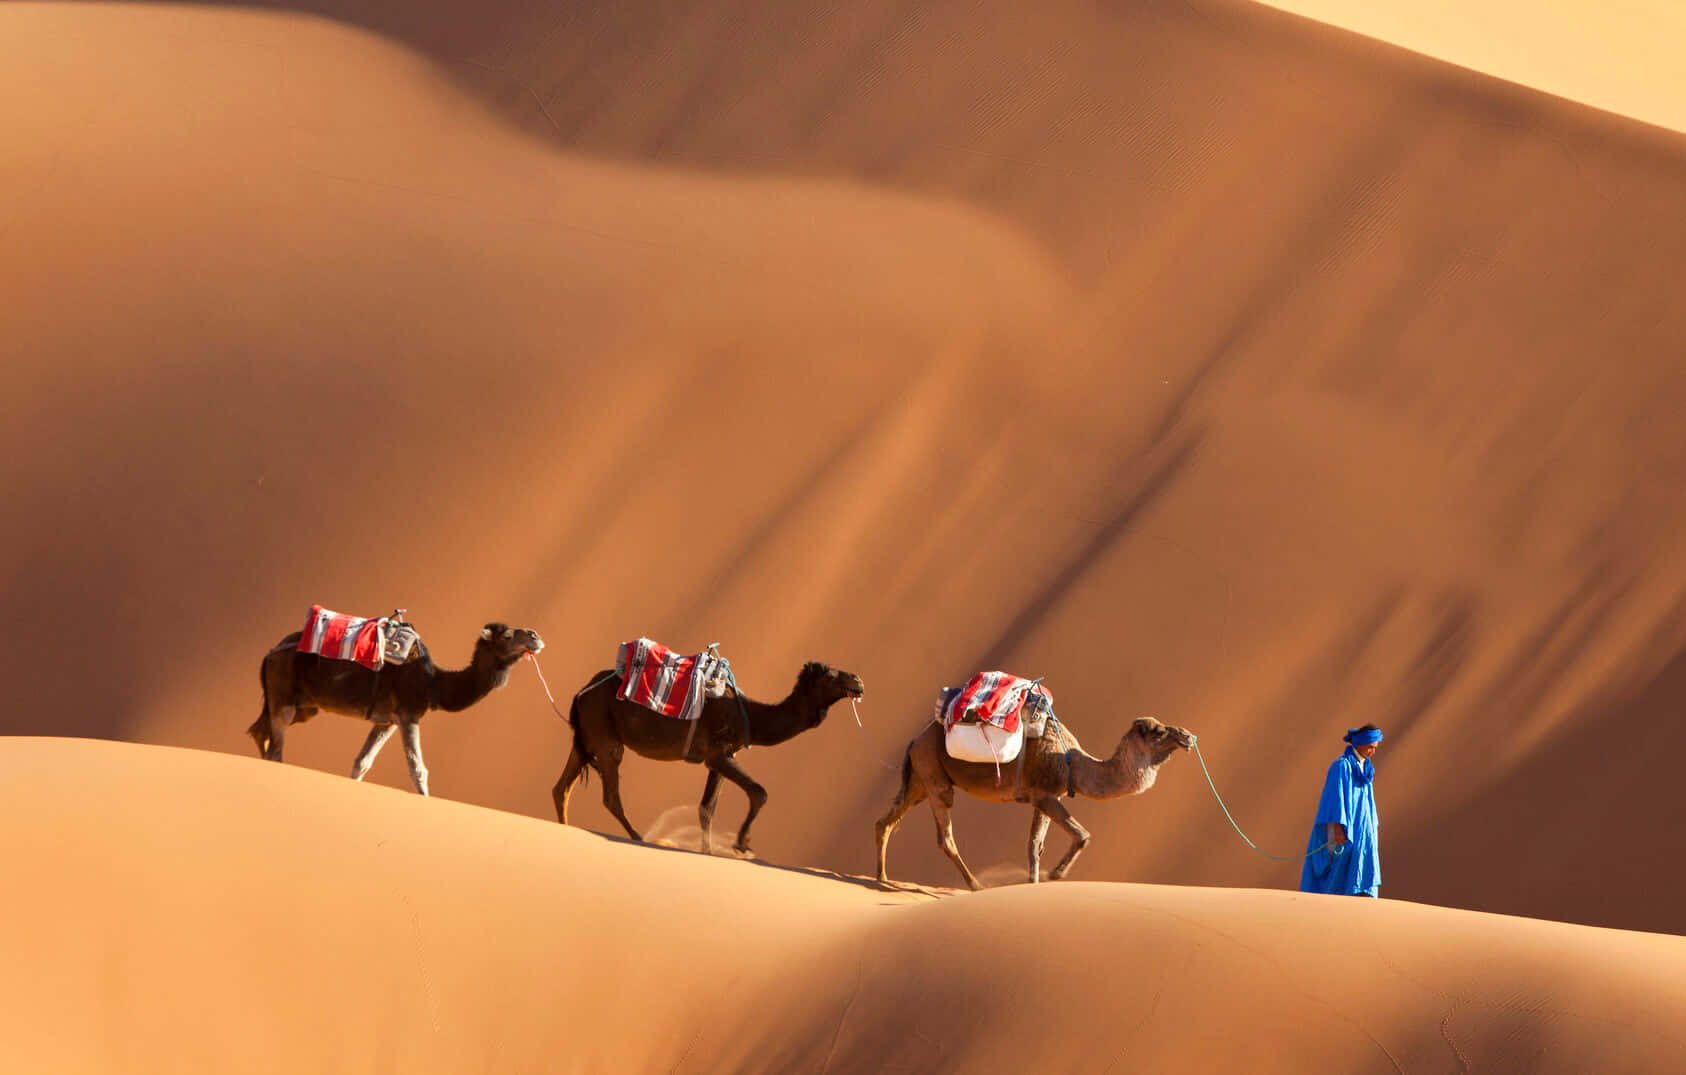 A Man Is Leading A Group Of Camels Through The Desert